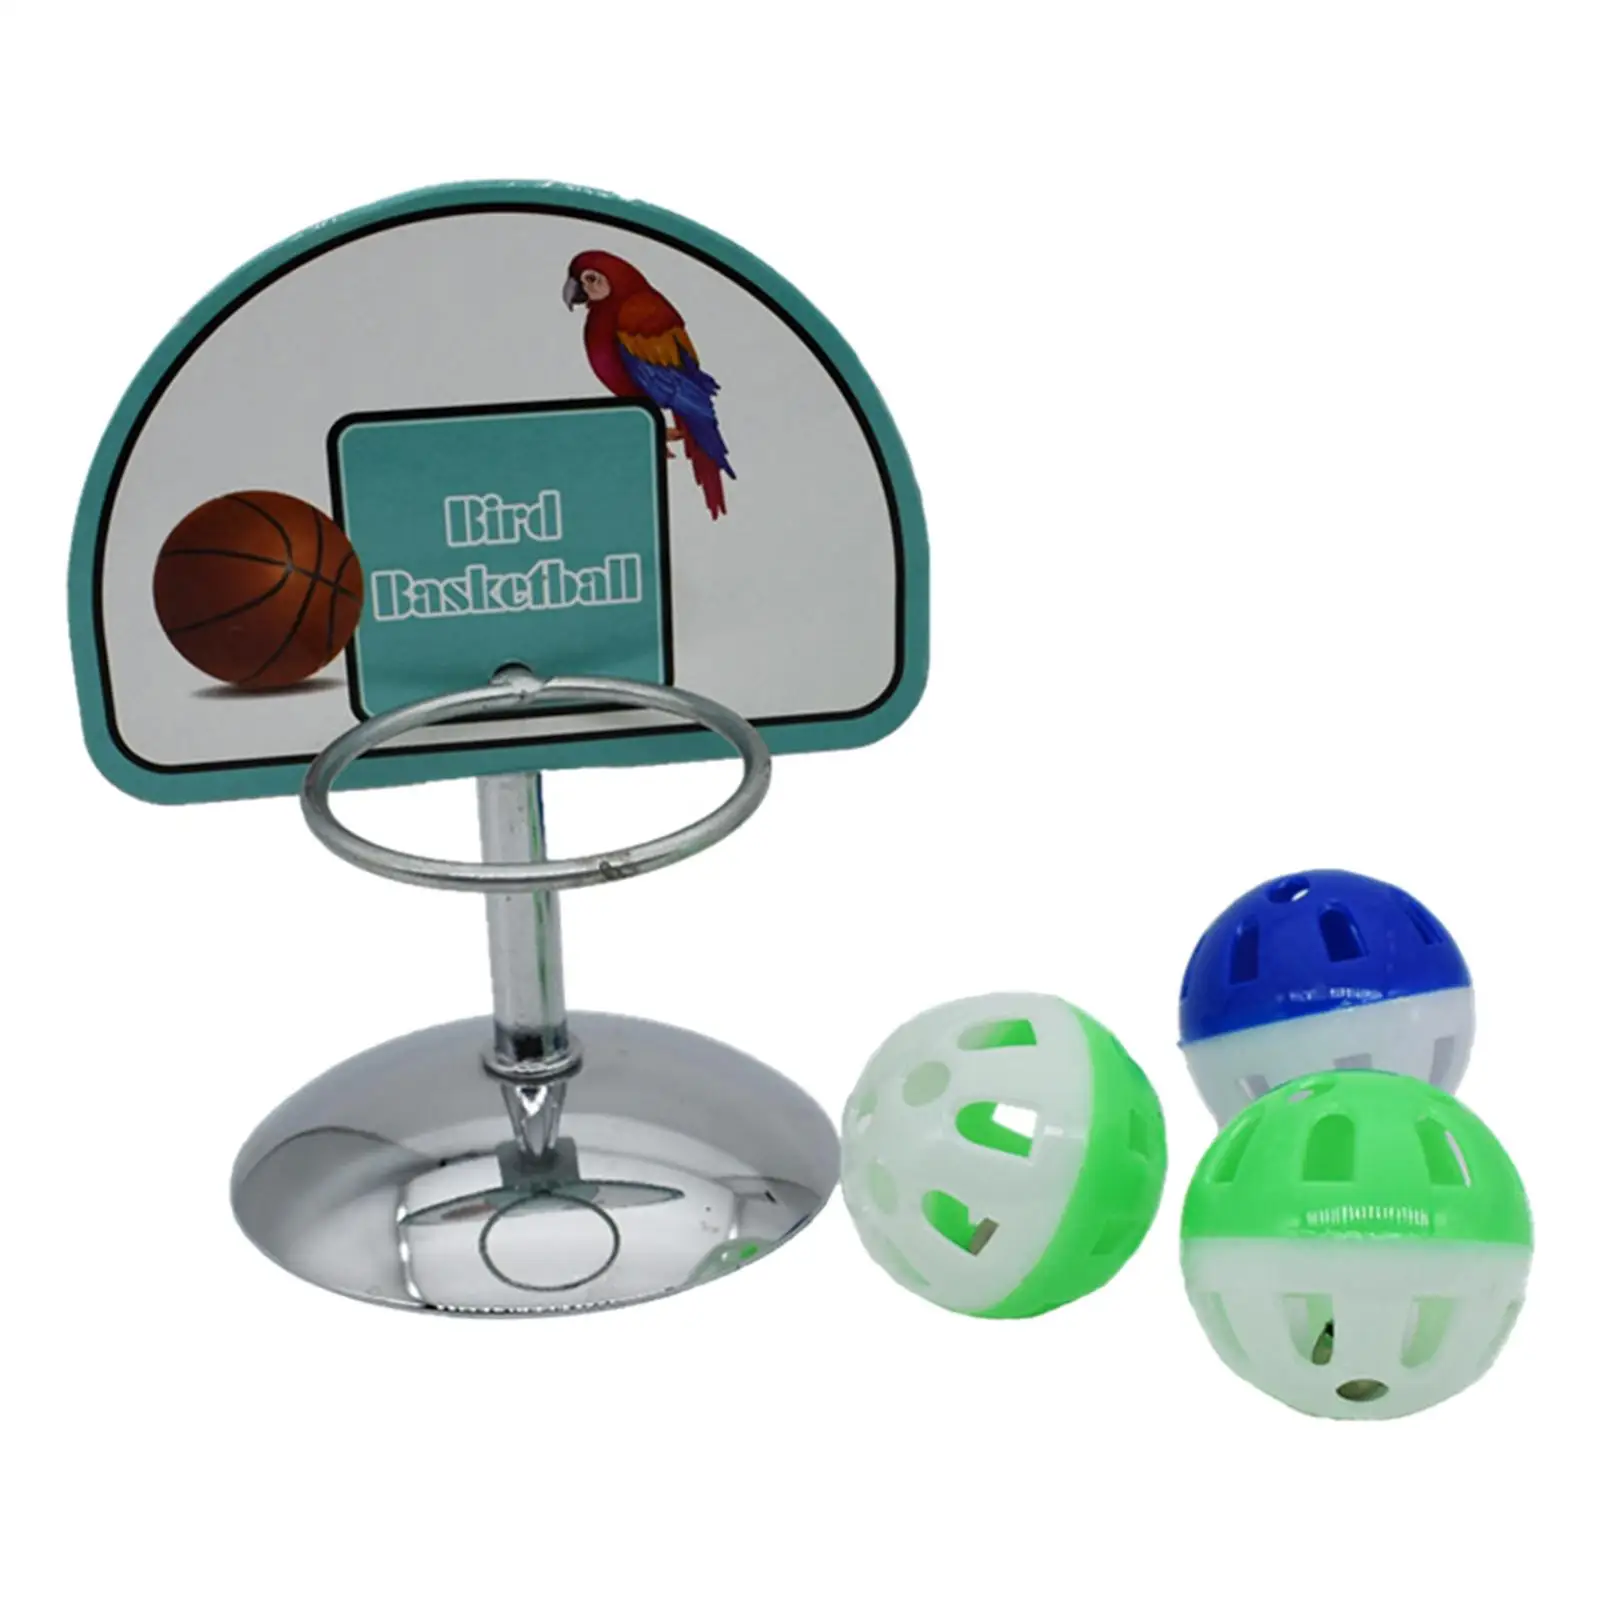 Funny Bird Basketball Toy Training Parrot Intelligence Toy Parakeet Finches